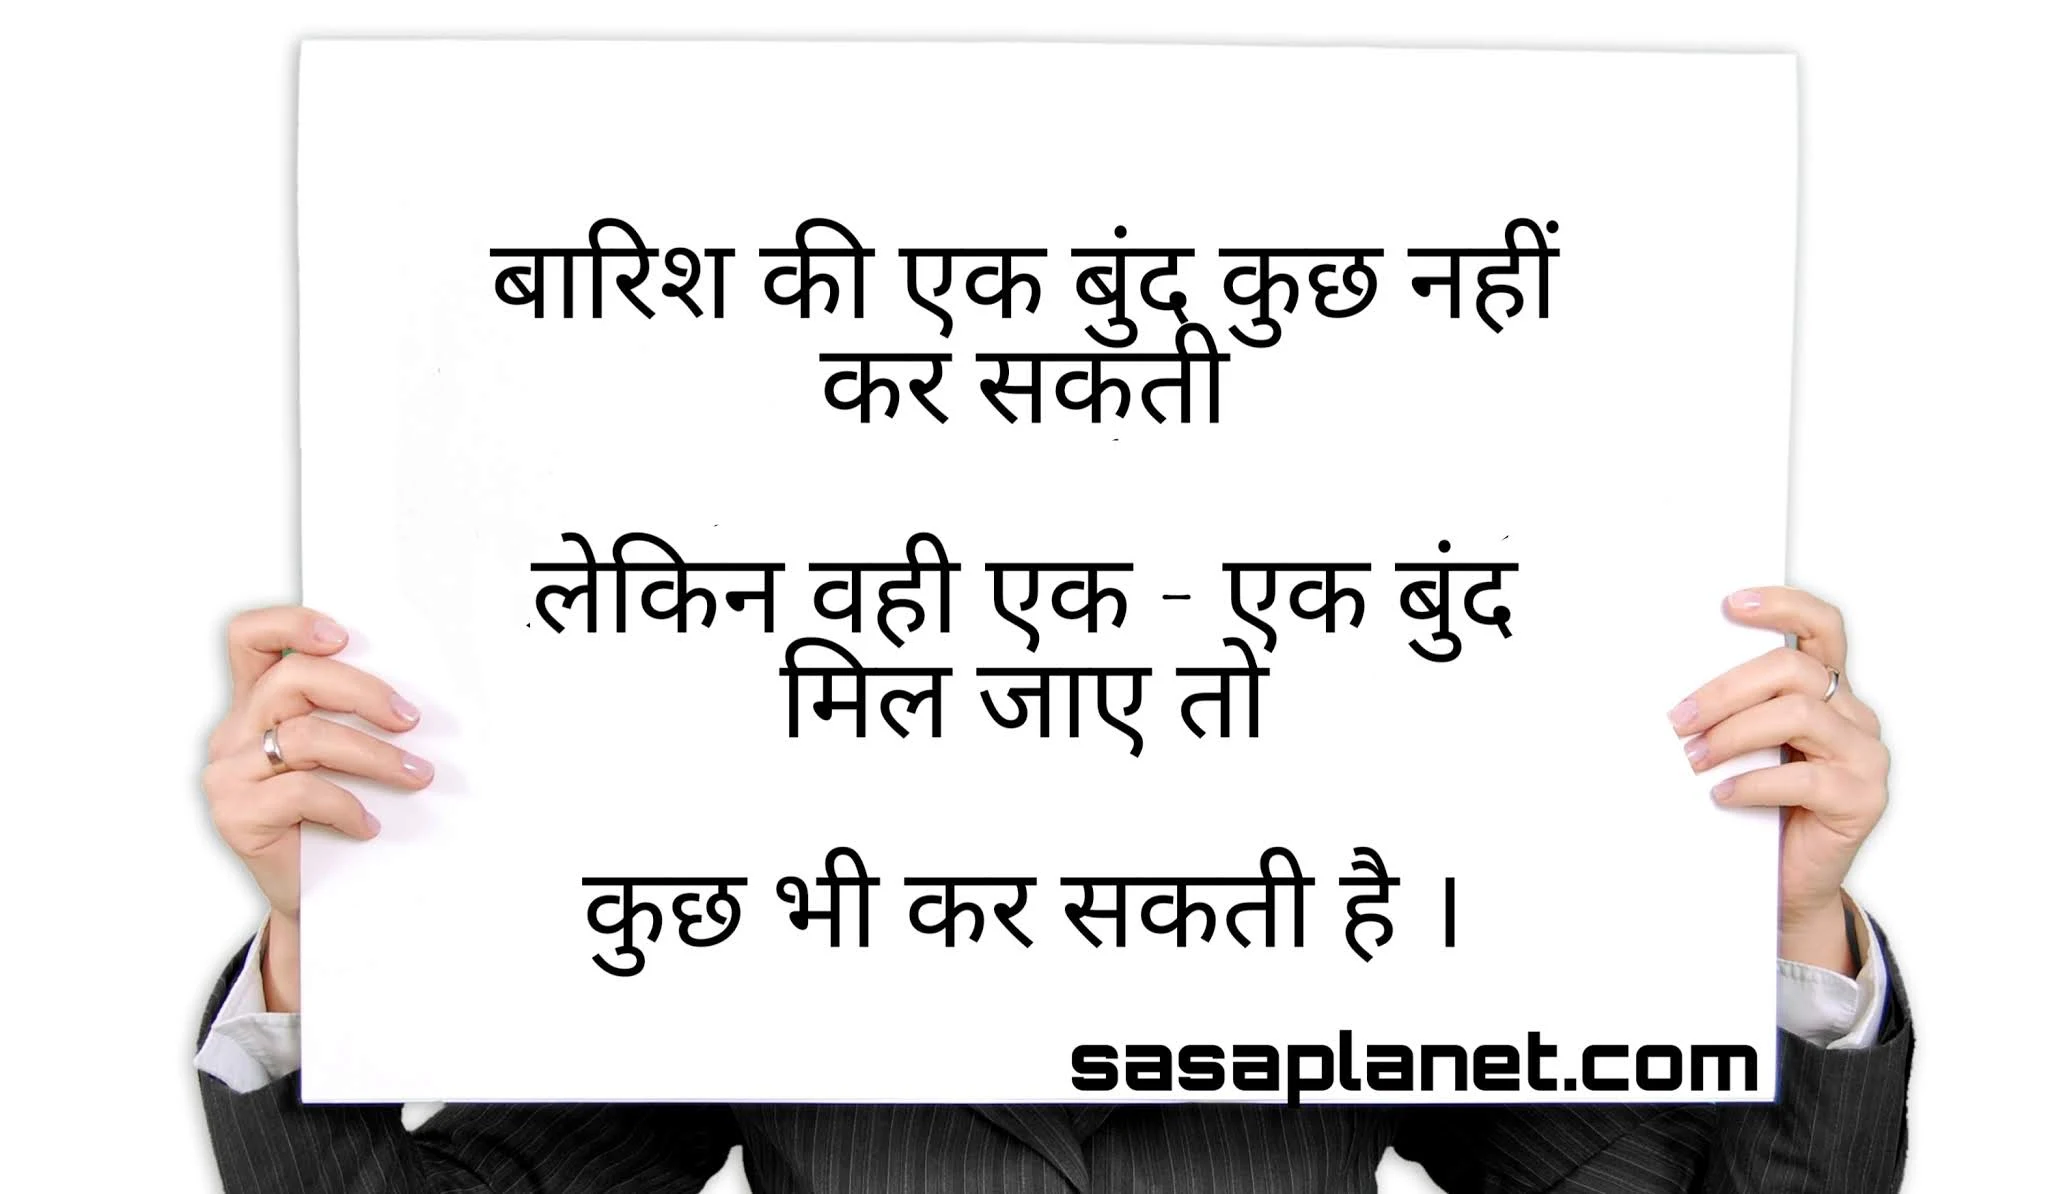 Unity is strength quotes in Hindi